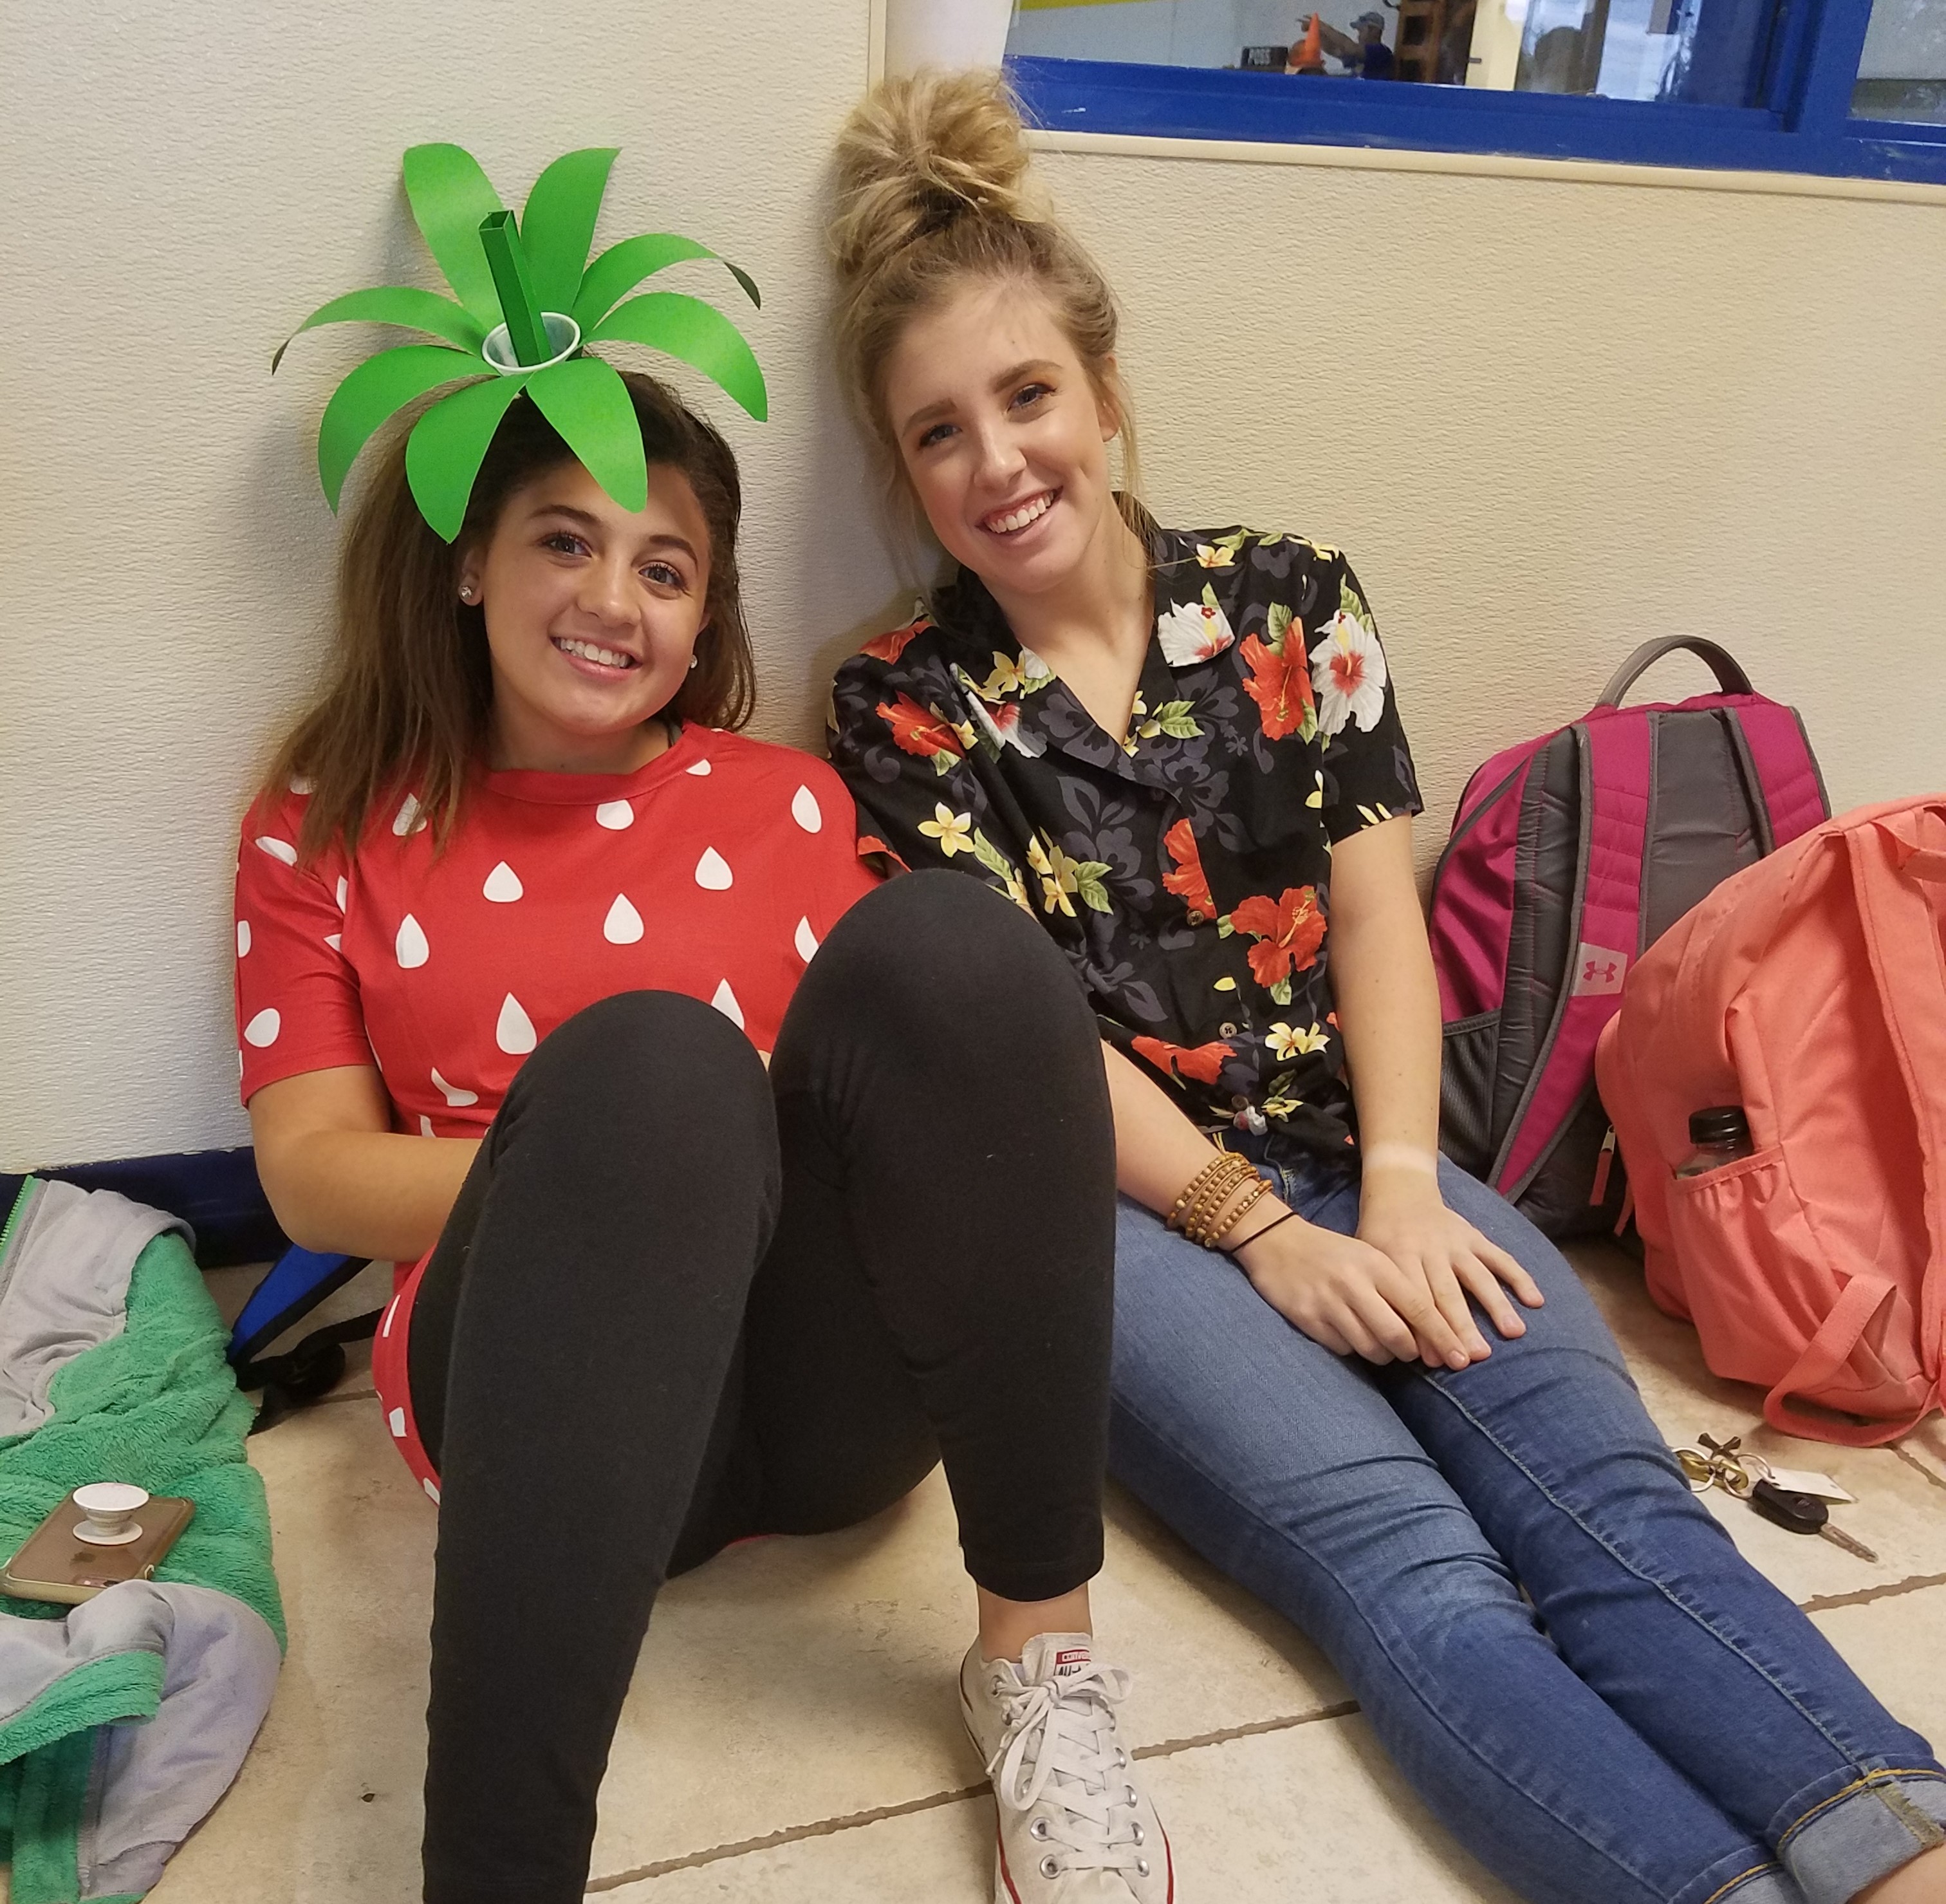 Two girls smiling at the picture, one of them dressed up as a strawberry.